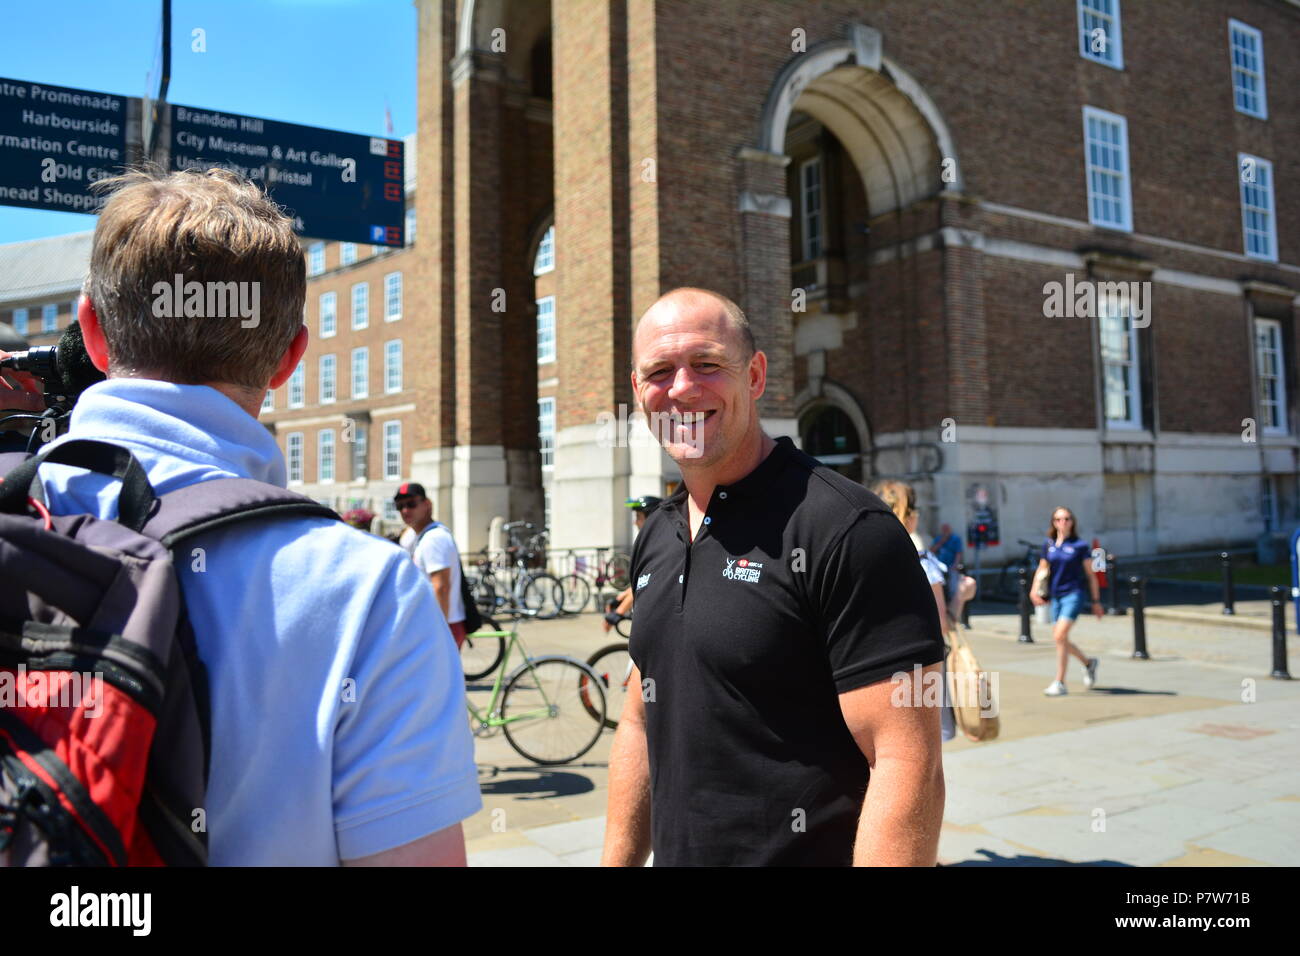 Bristol, UK. 08th July, 2018. A free festival of British Cycling, Elite Pro Racers and then after the event ride the track, for all ages.There was a long delayed start for the Main Mens Pro Racers due to not enough safety barriers put in place. Mike Tindall was all so seen at the event on a very very hot and humid day. Robert Timoney/Alamy/Live/News Credit: Robert Timoney/Alamy Live News Stock Photo